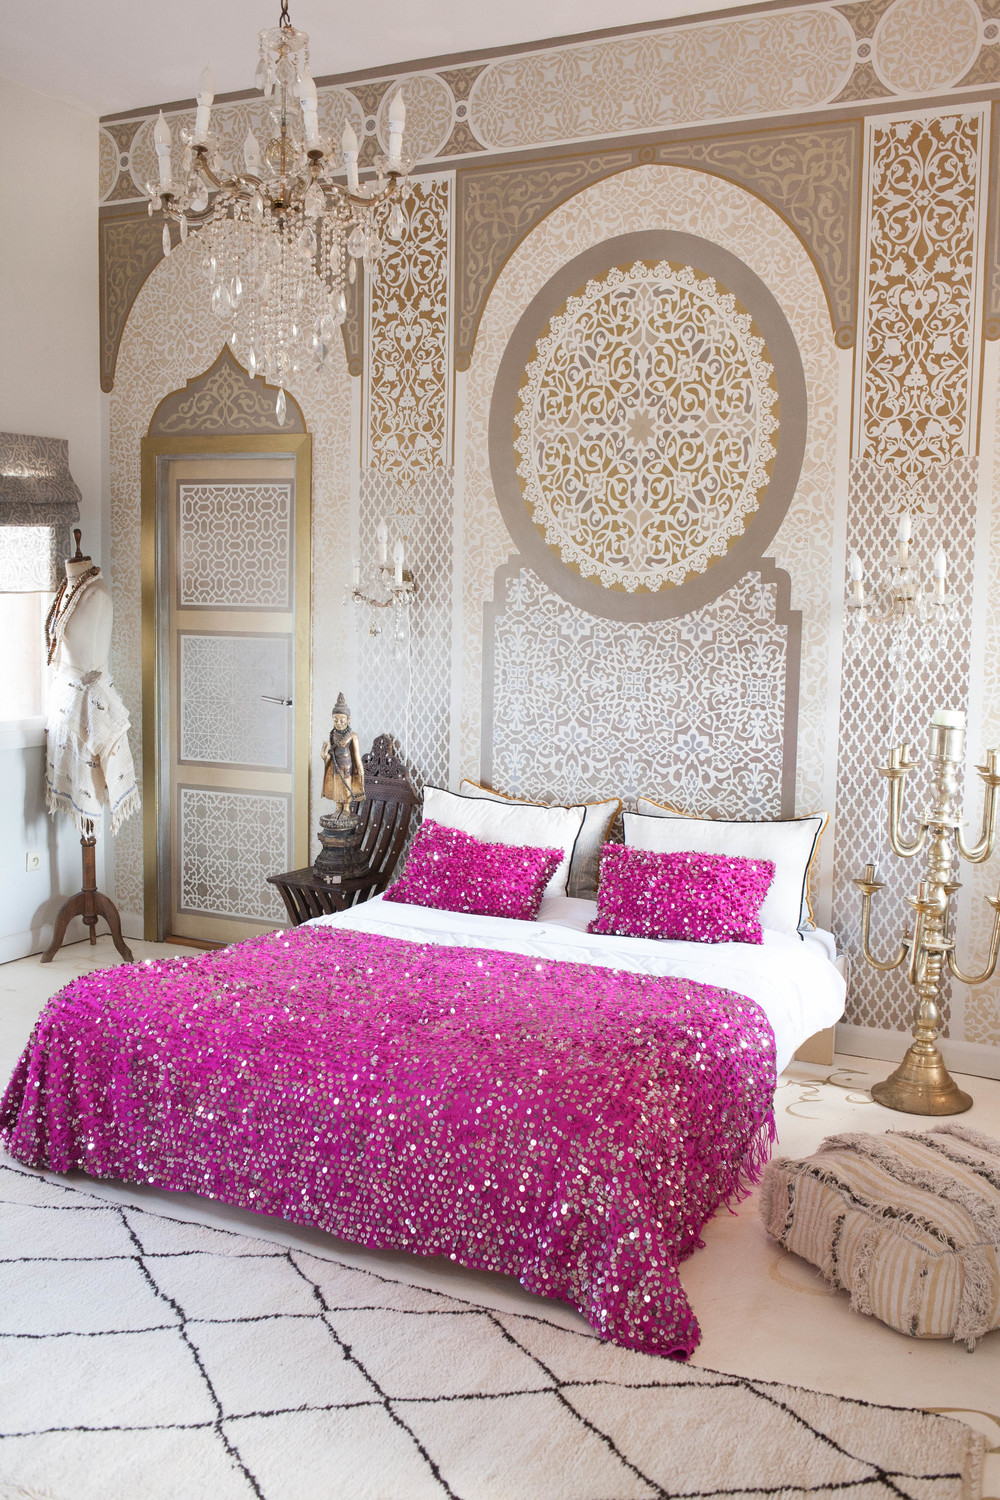 Creatice Morrocan Theme Bedroom with Simple Decor